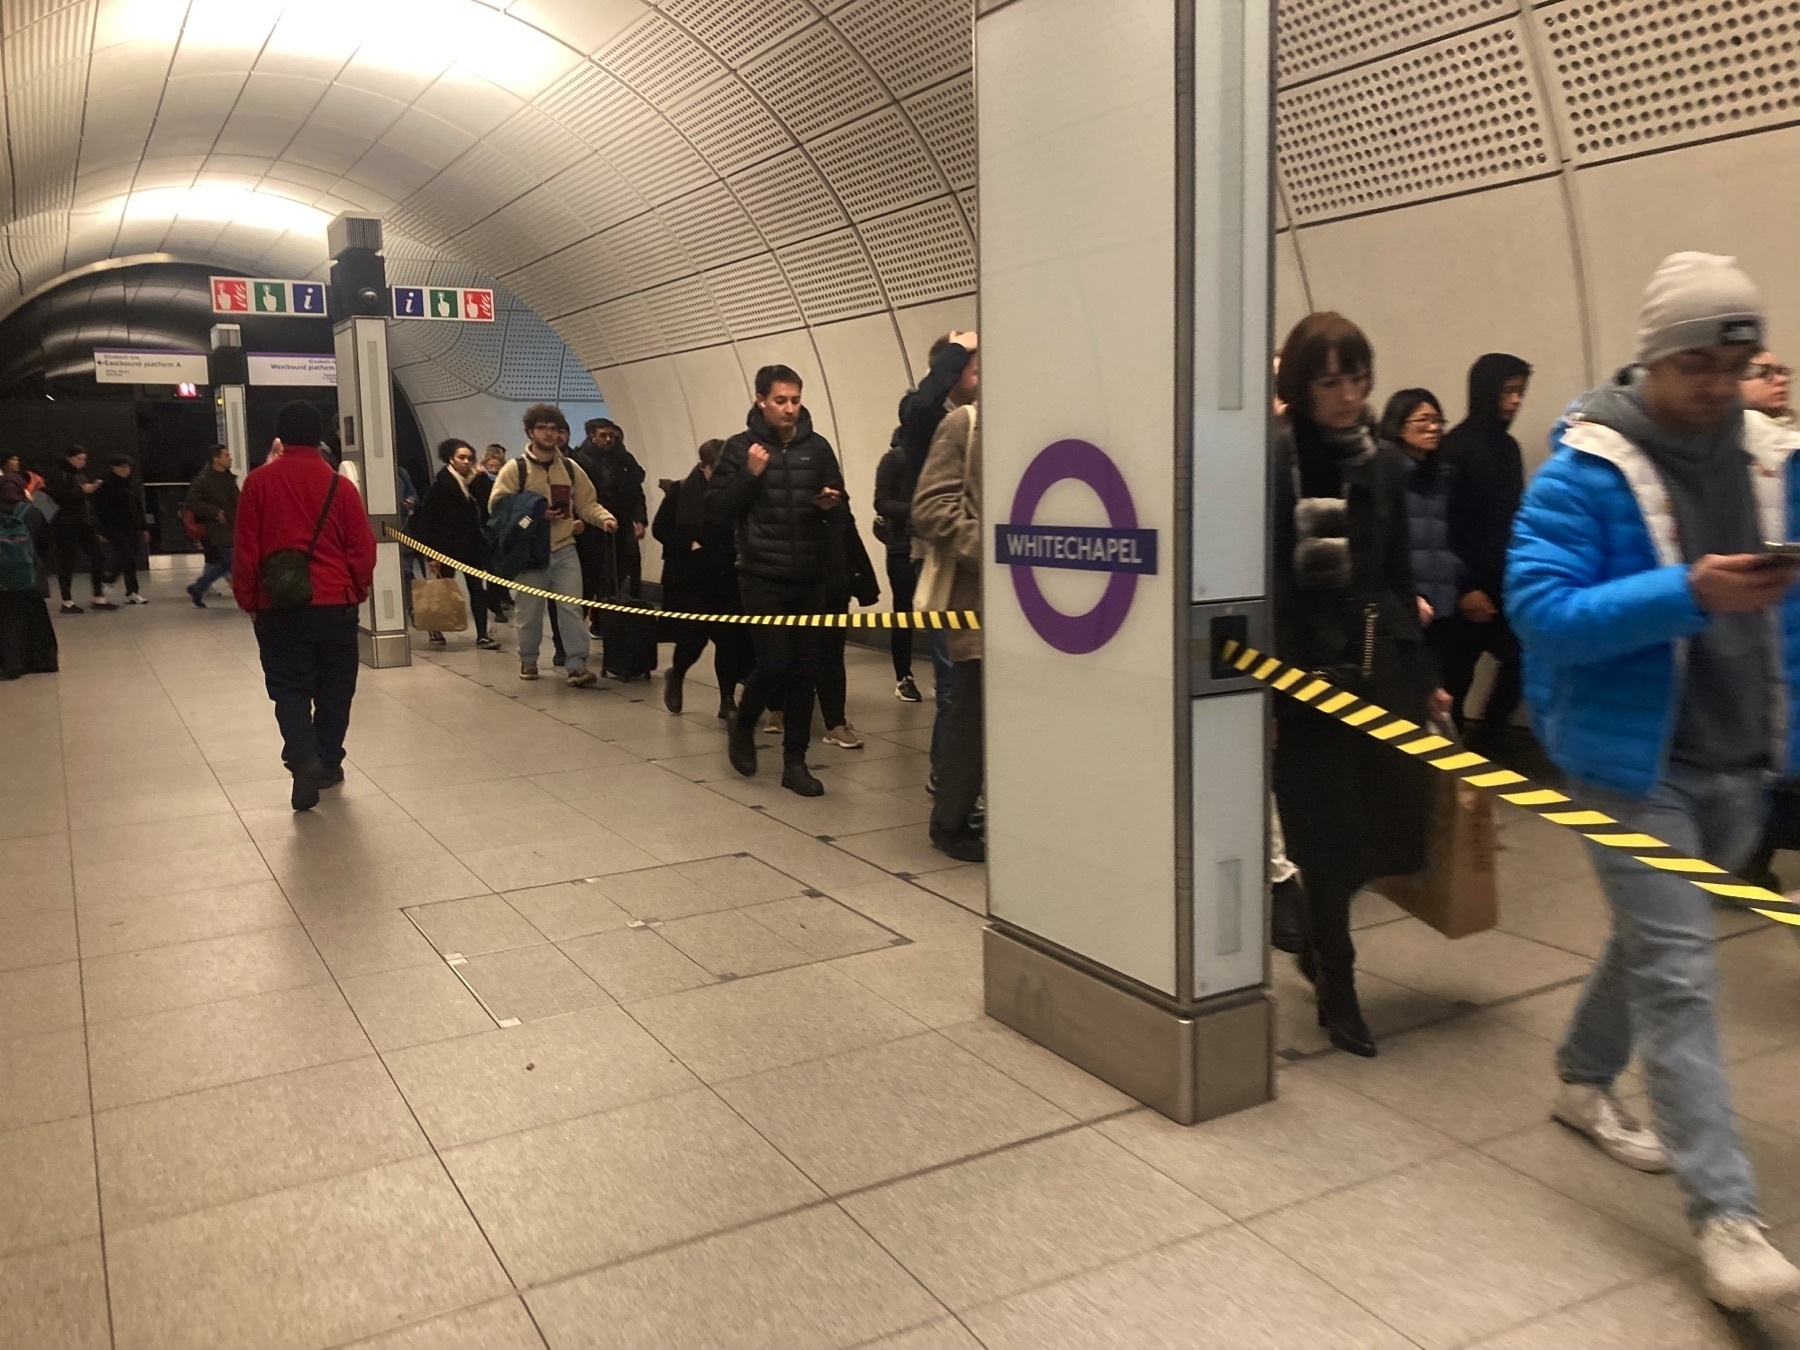 Passengers separated by a tape barrier for crowd control on the Elizabeth Line in Whitechapel, East London